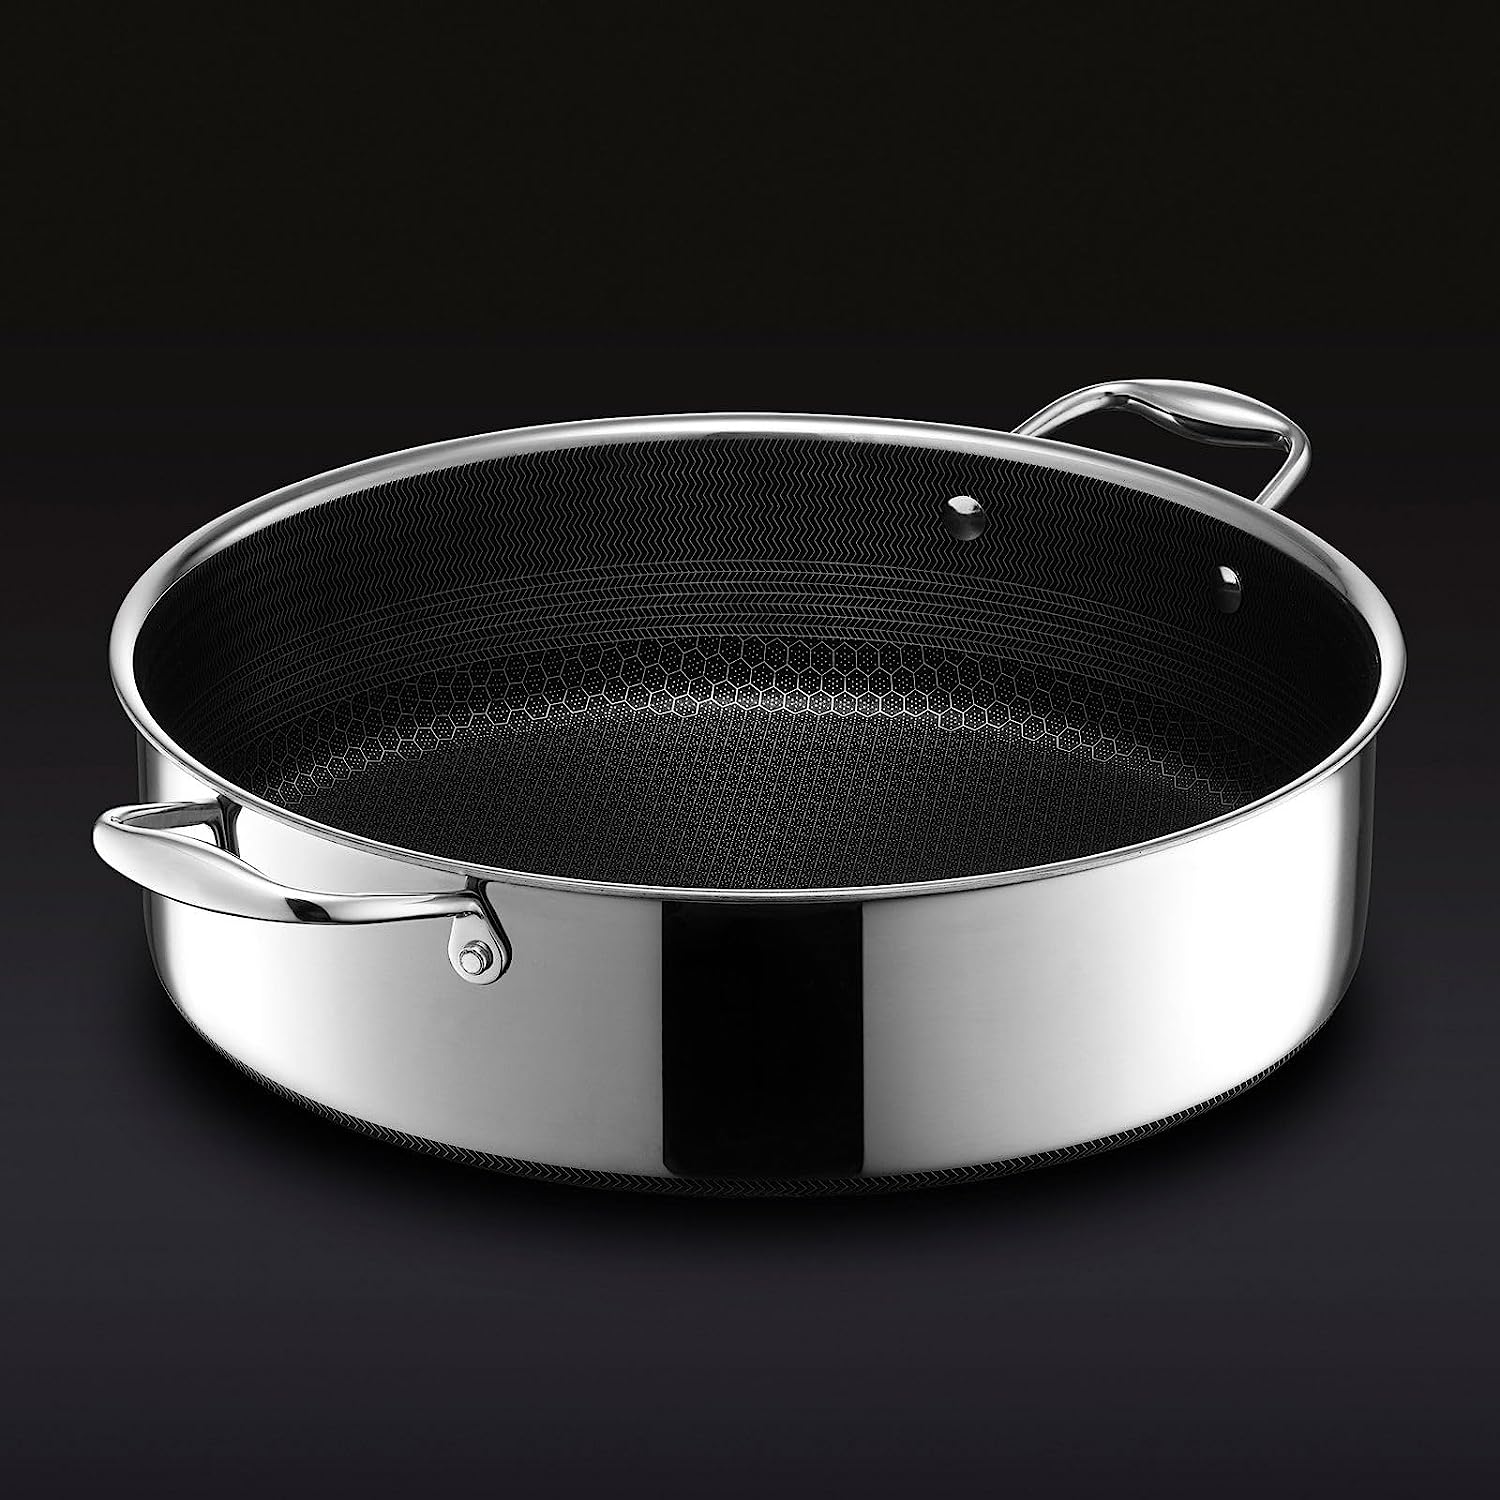 HexClad 8 inch Hybrid Stainless Steel Cookware Frying Pan with Glass Lid,  Nonstick 